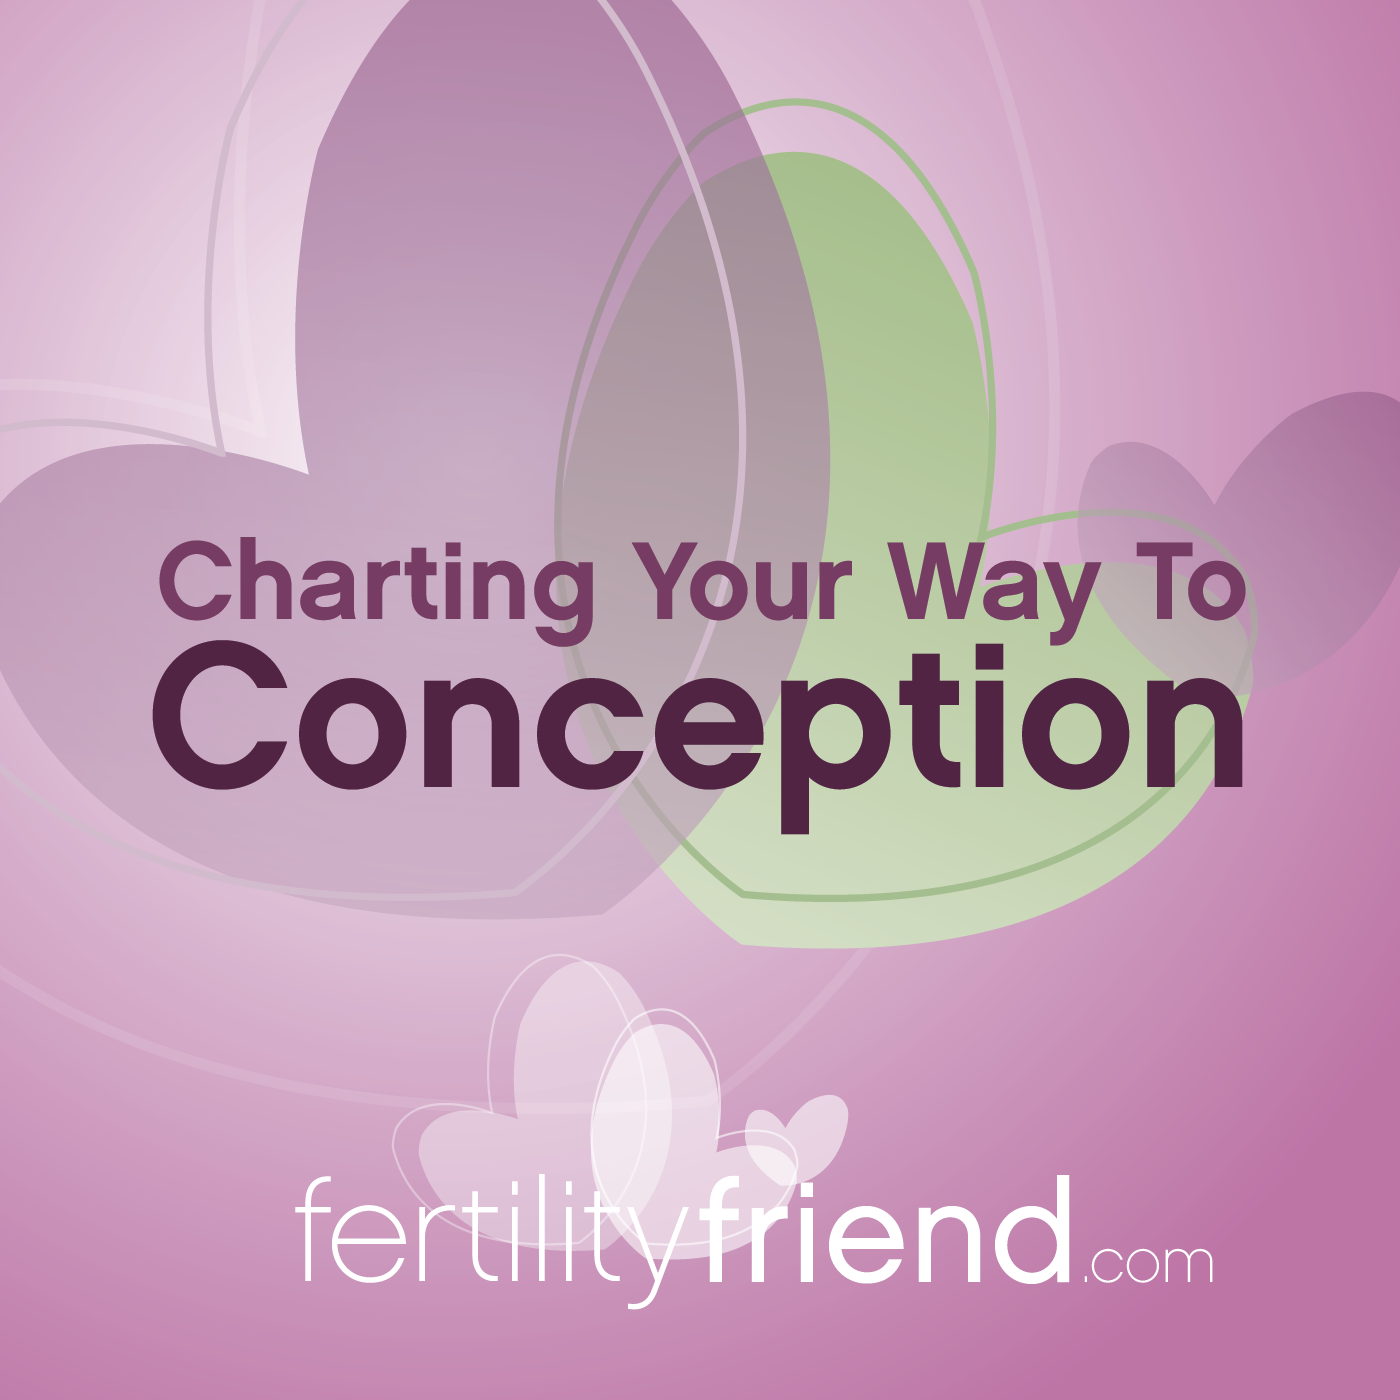 Charting Your Way To Conception - Learn Fertility Charting With Fertility Friend